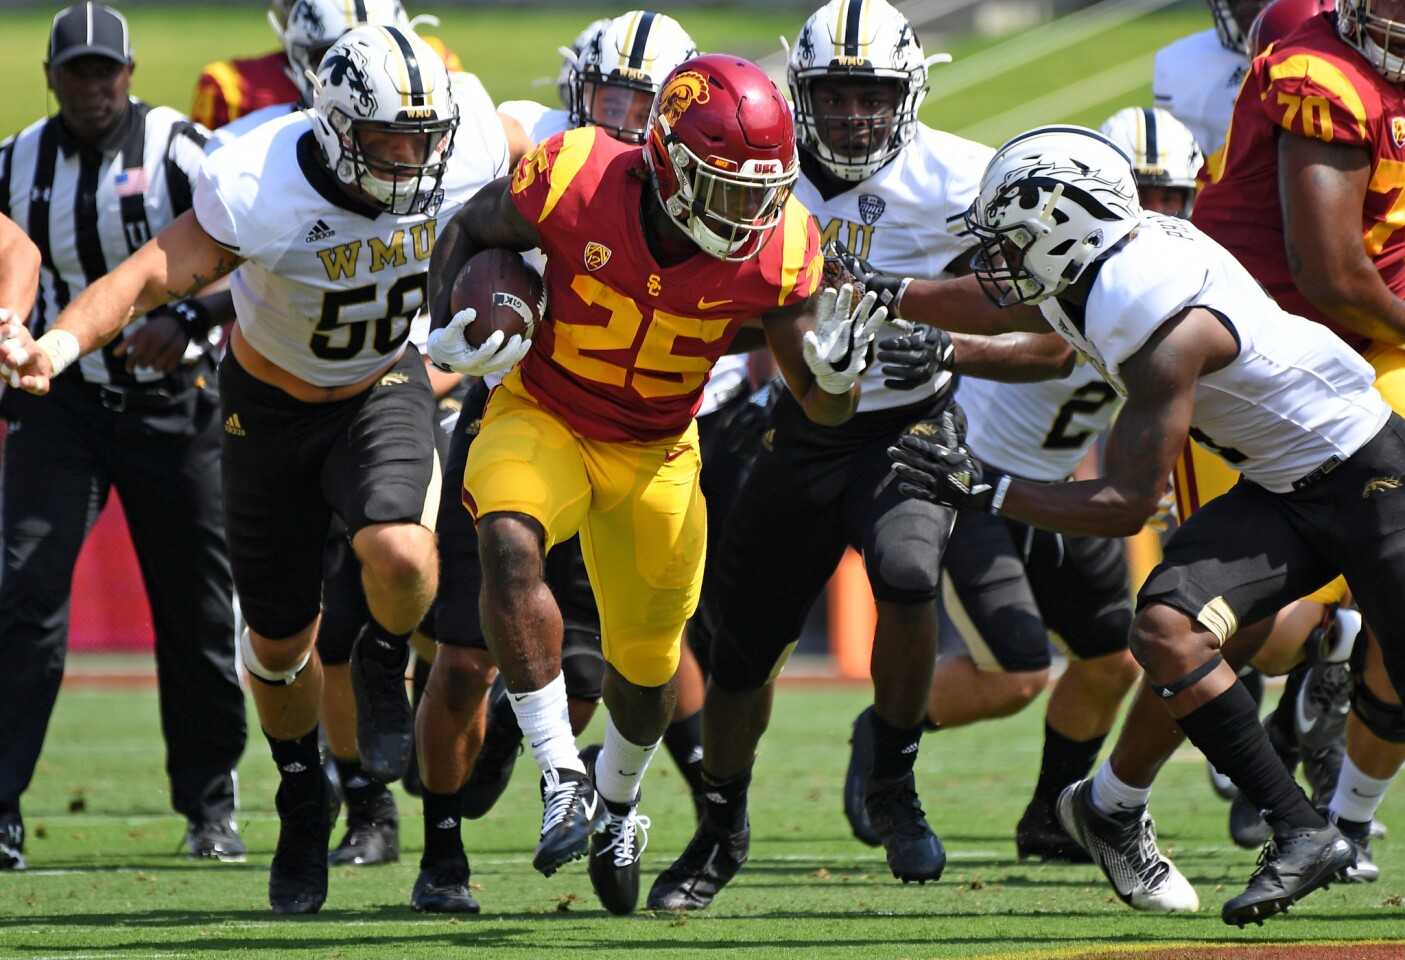 USC running back Ronald Jones II picks uo big yards against the Western Michigan defense during the first quarter at the Coliseum.